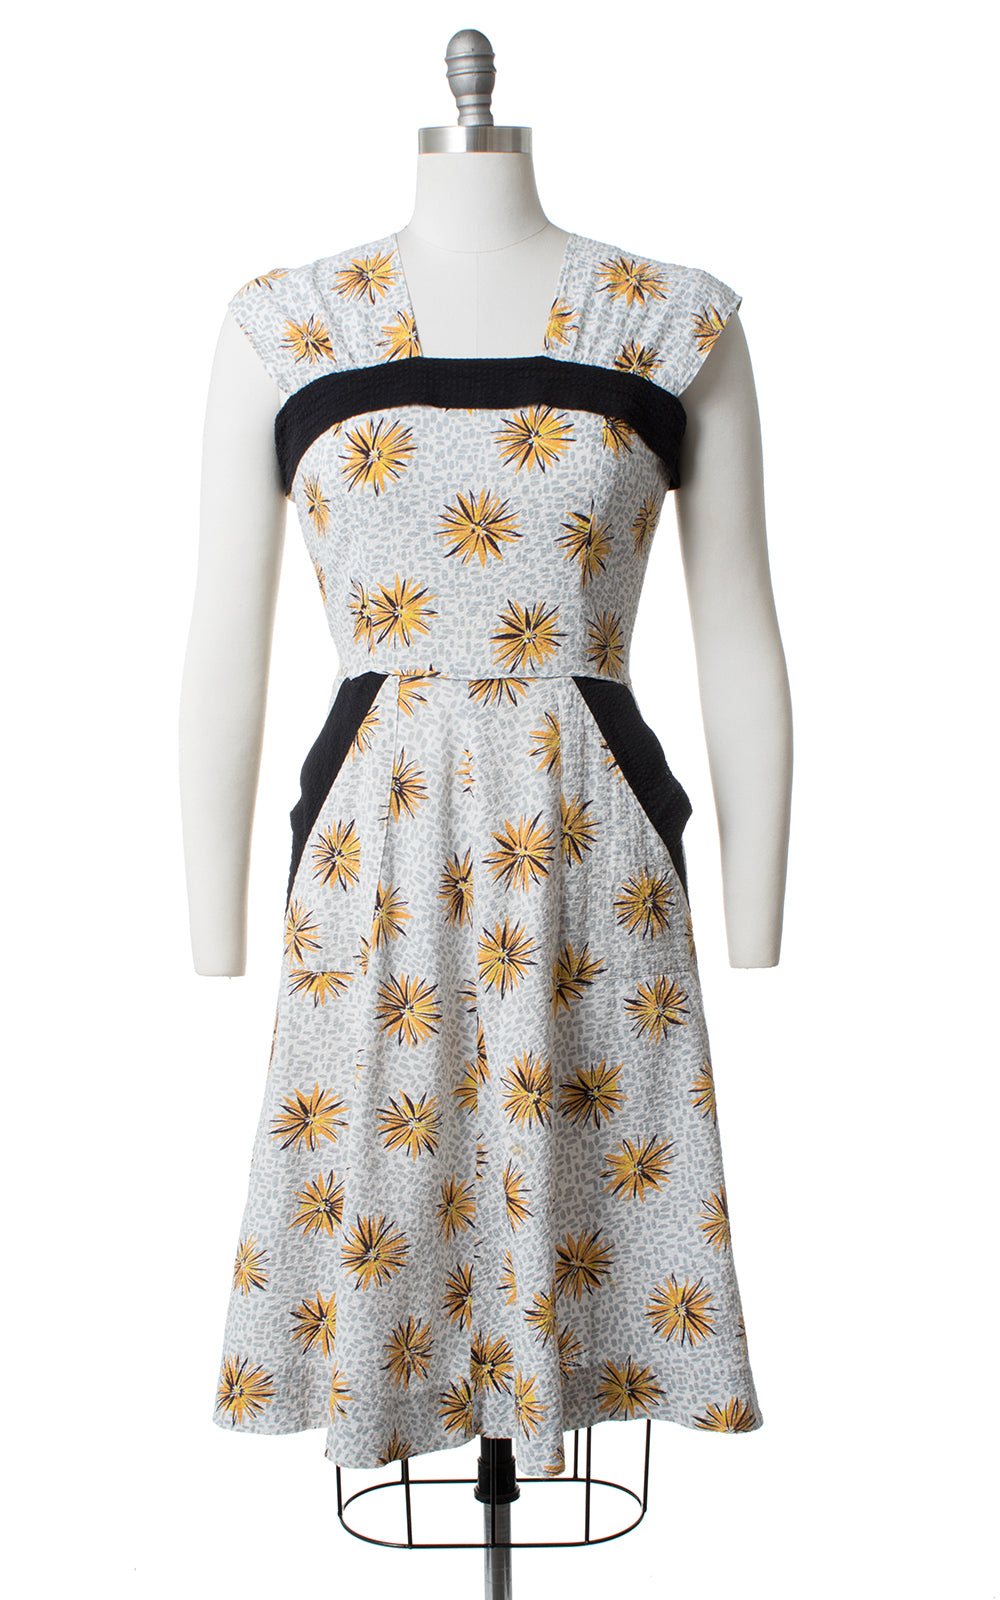 1940s Starburst Printed Cotton Sundress with Pockets